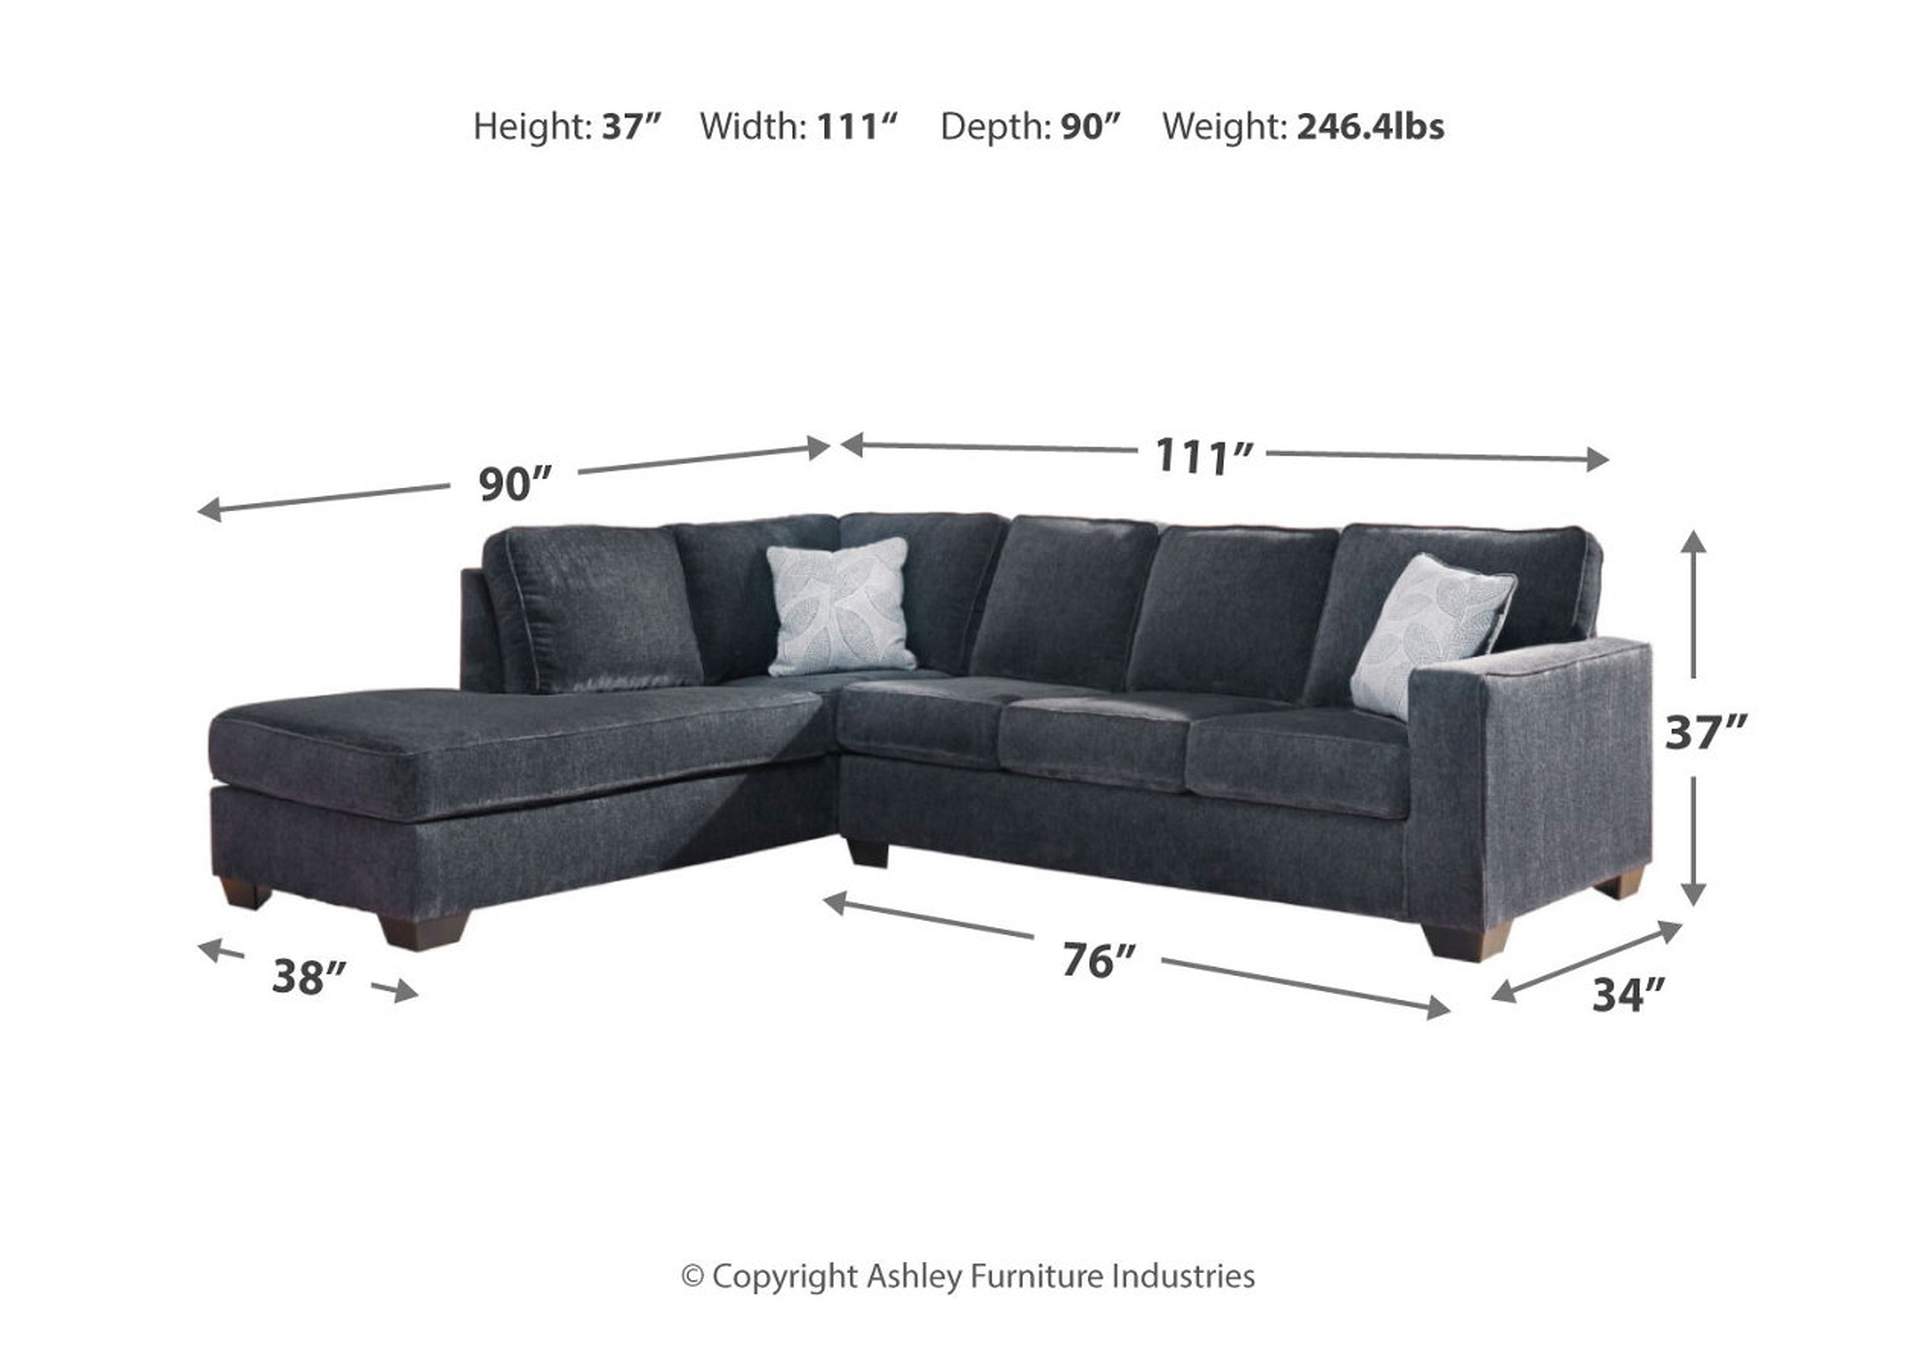 Altari 2-Piece Sectional with Chaise,Signature Design By Ashley